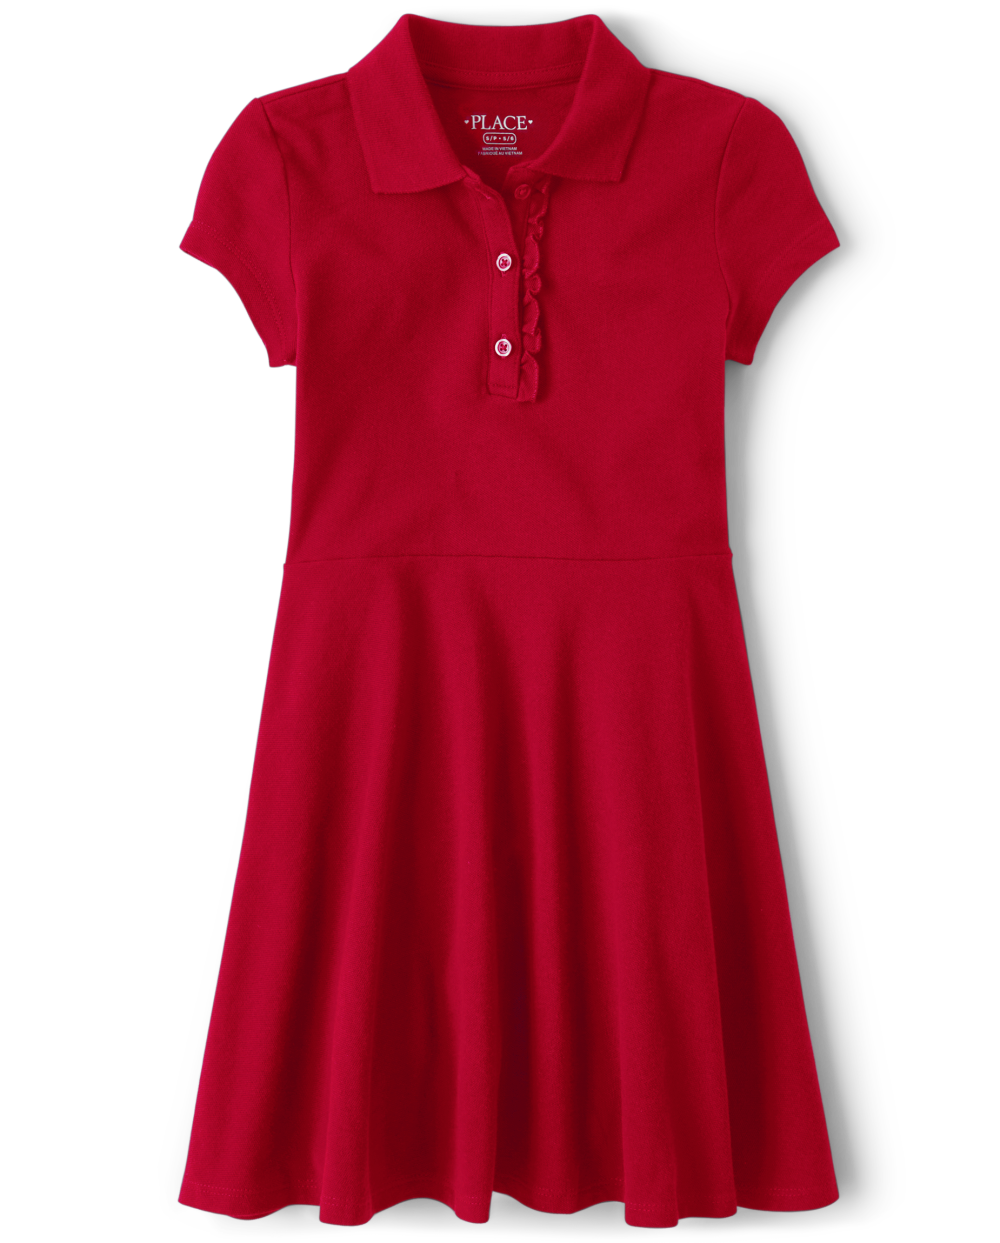 Girls Ruffle Trim Short Sleeves Sleeves Collared Above the Knee Dress